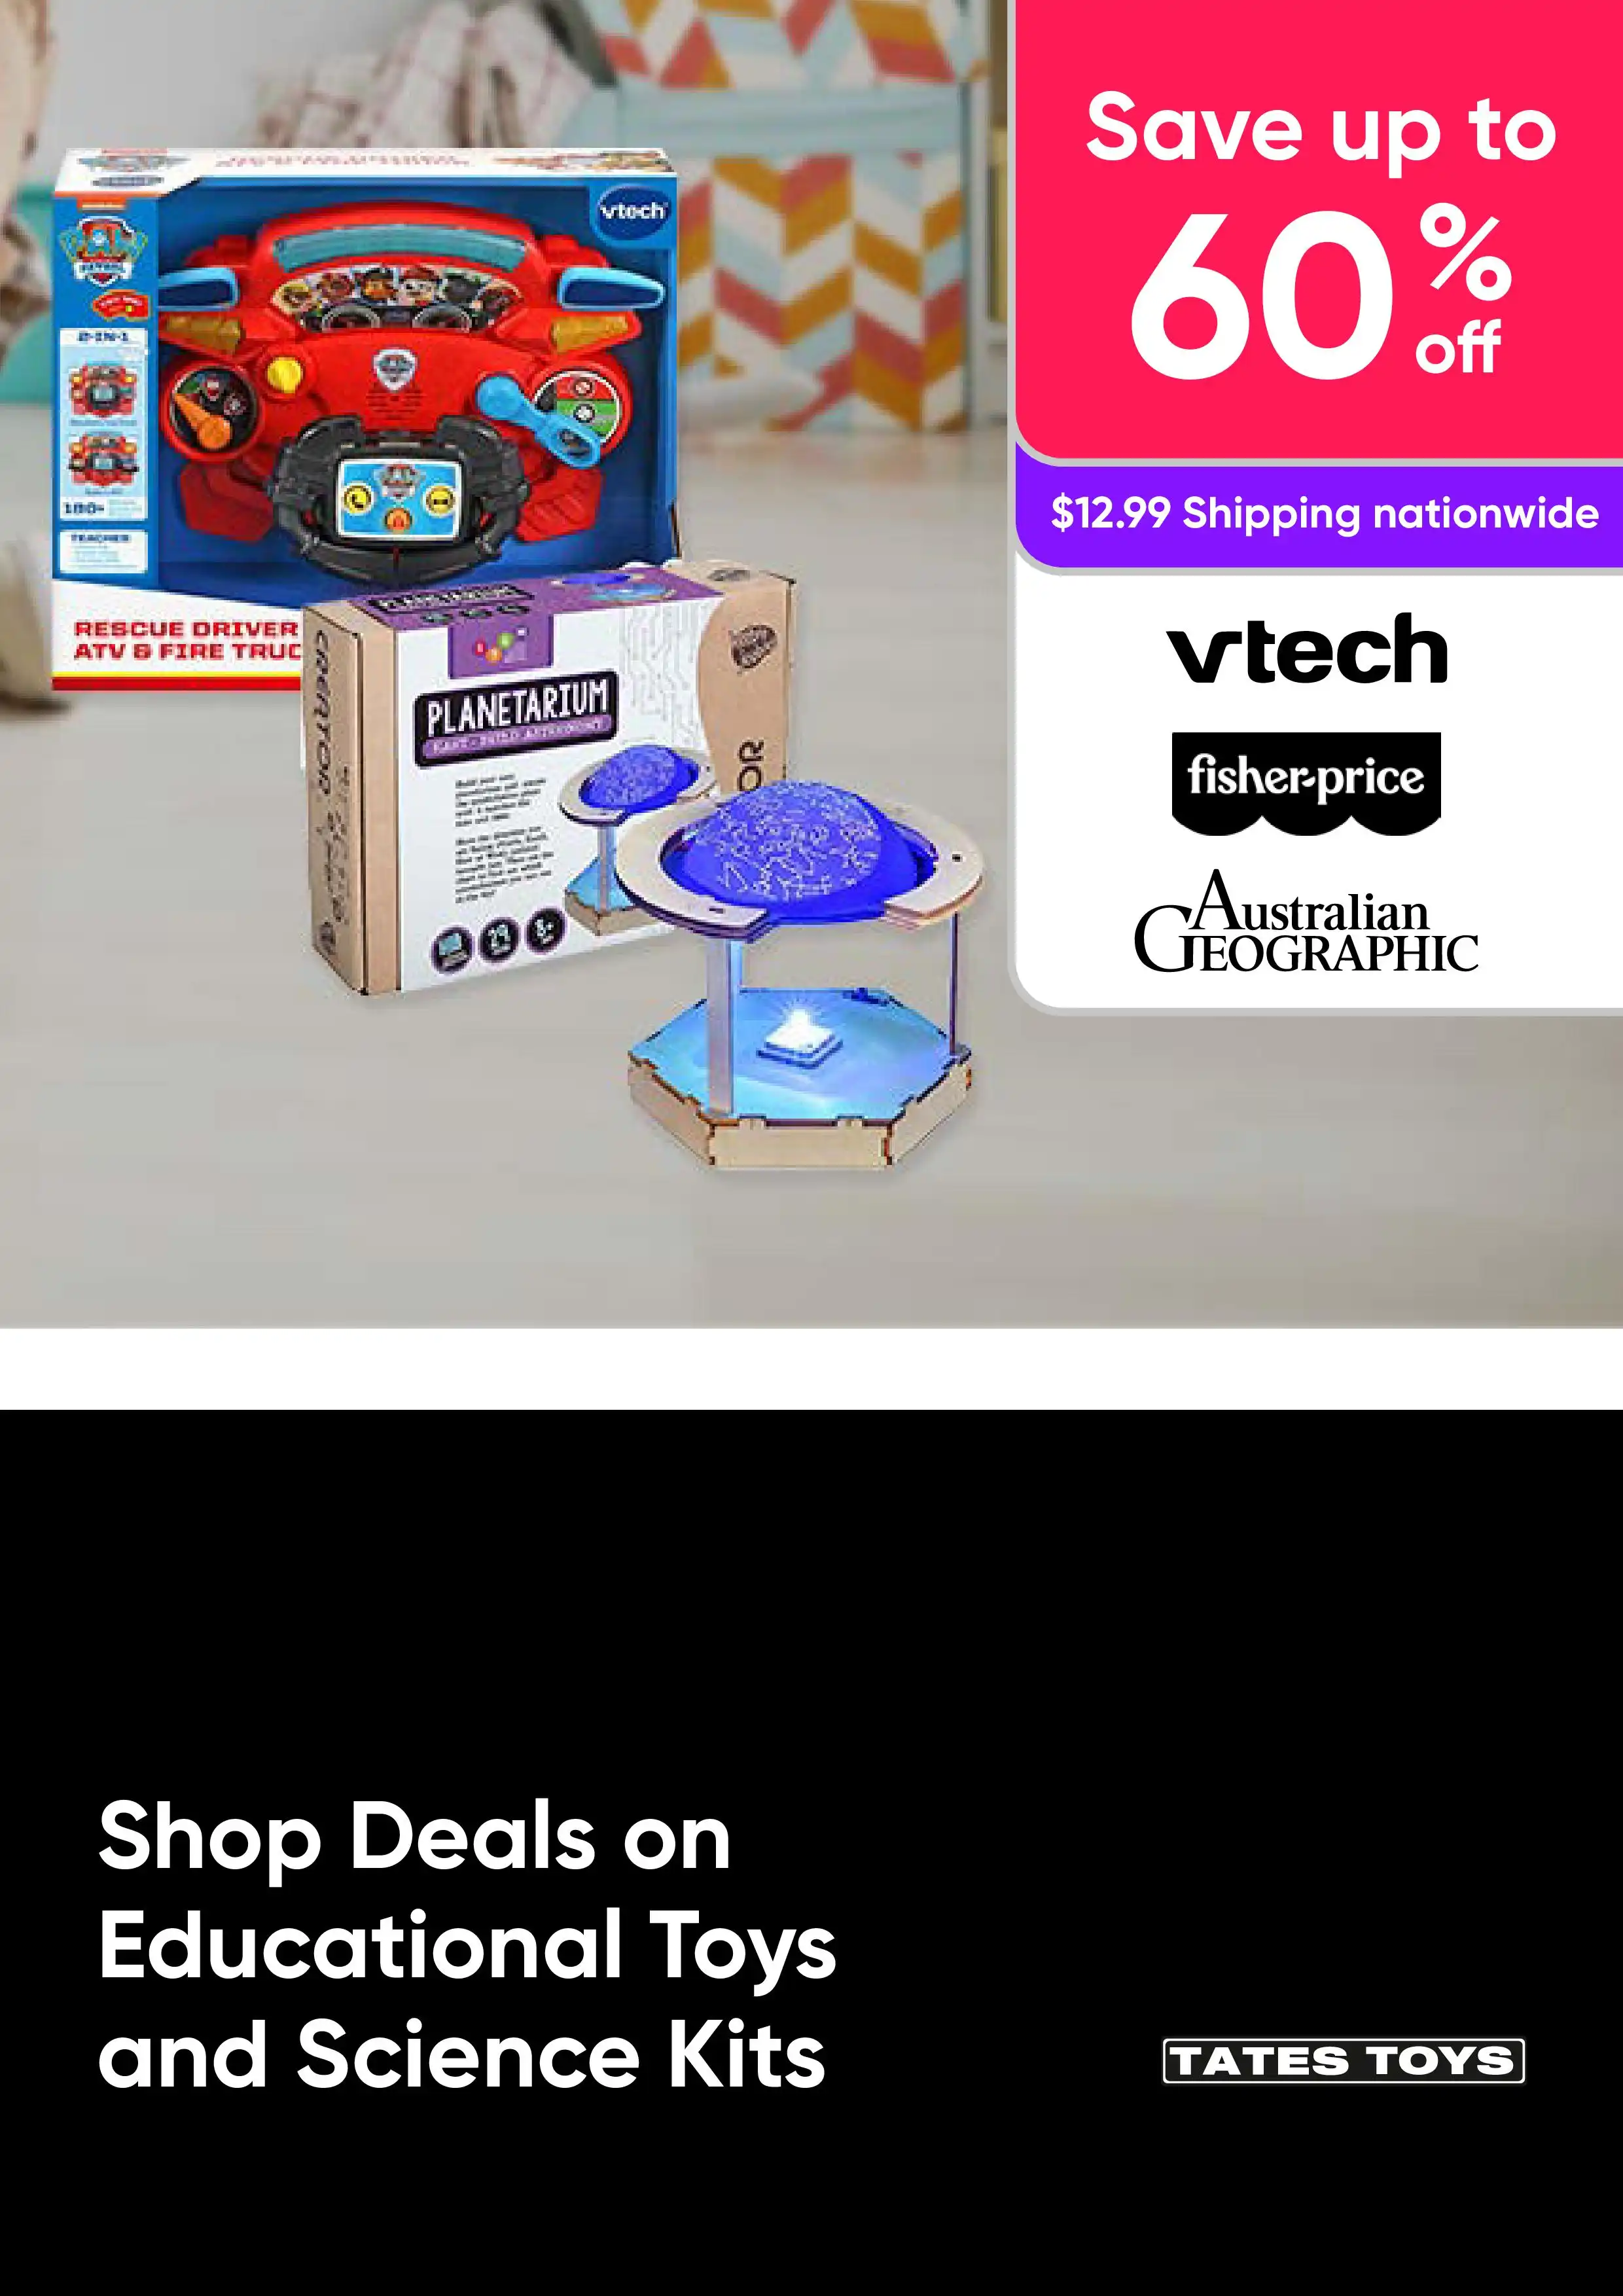 Smart Play, Shop Deals on Educational Toys and Science Kits